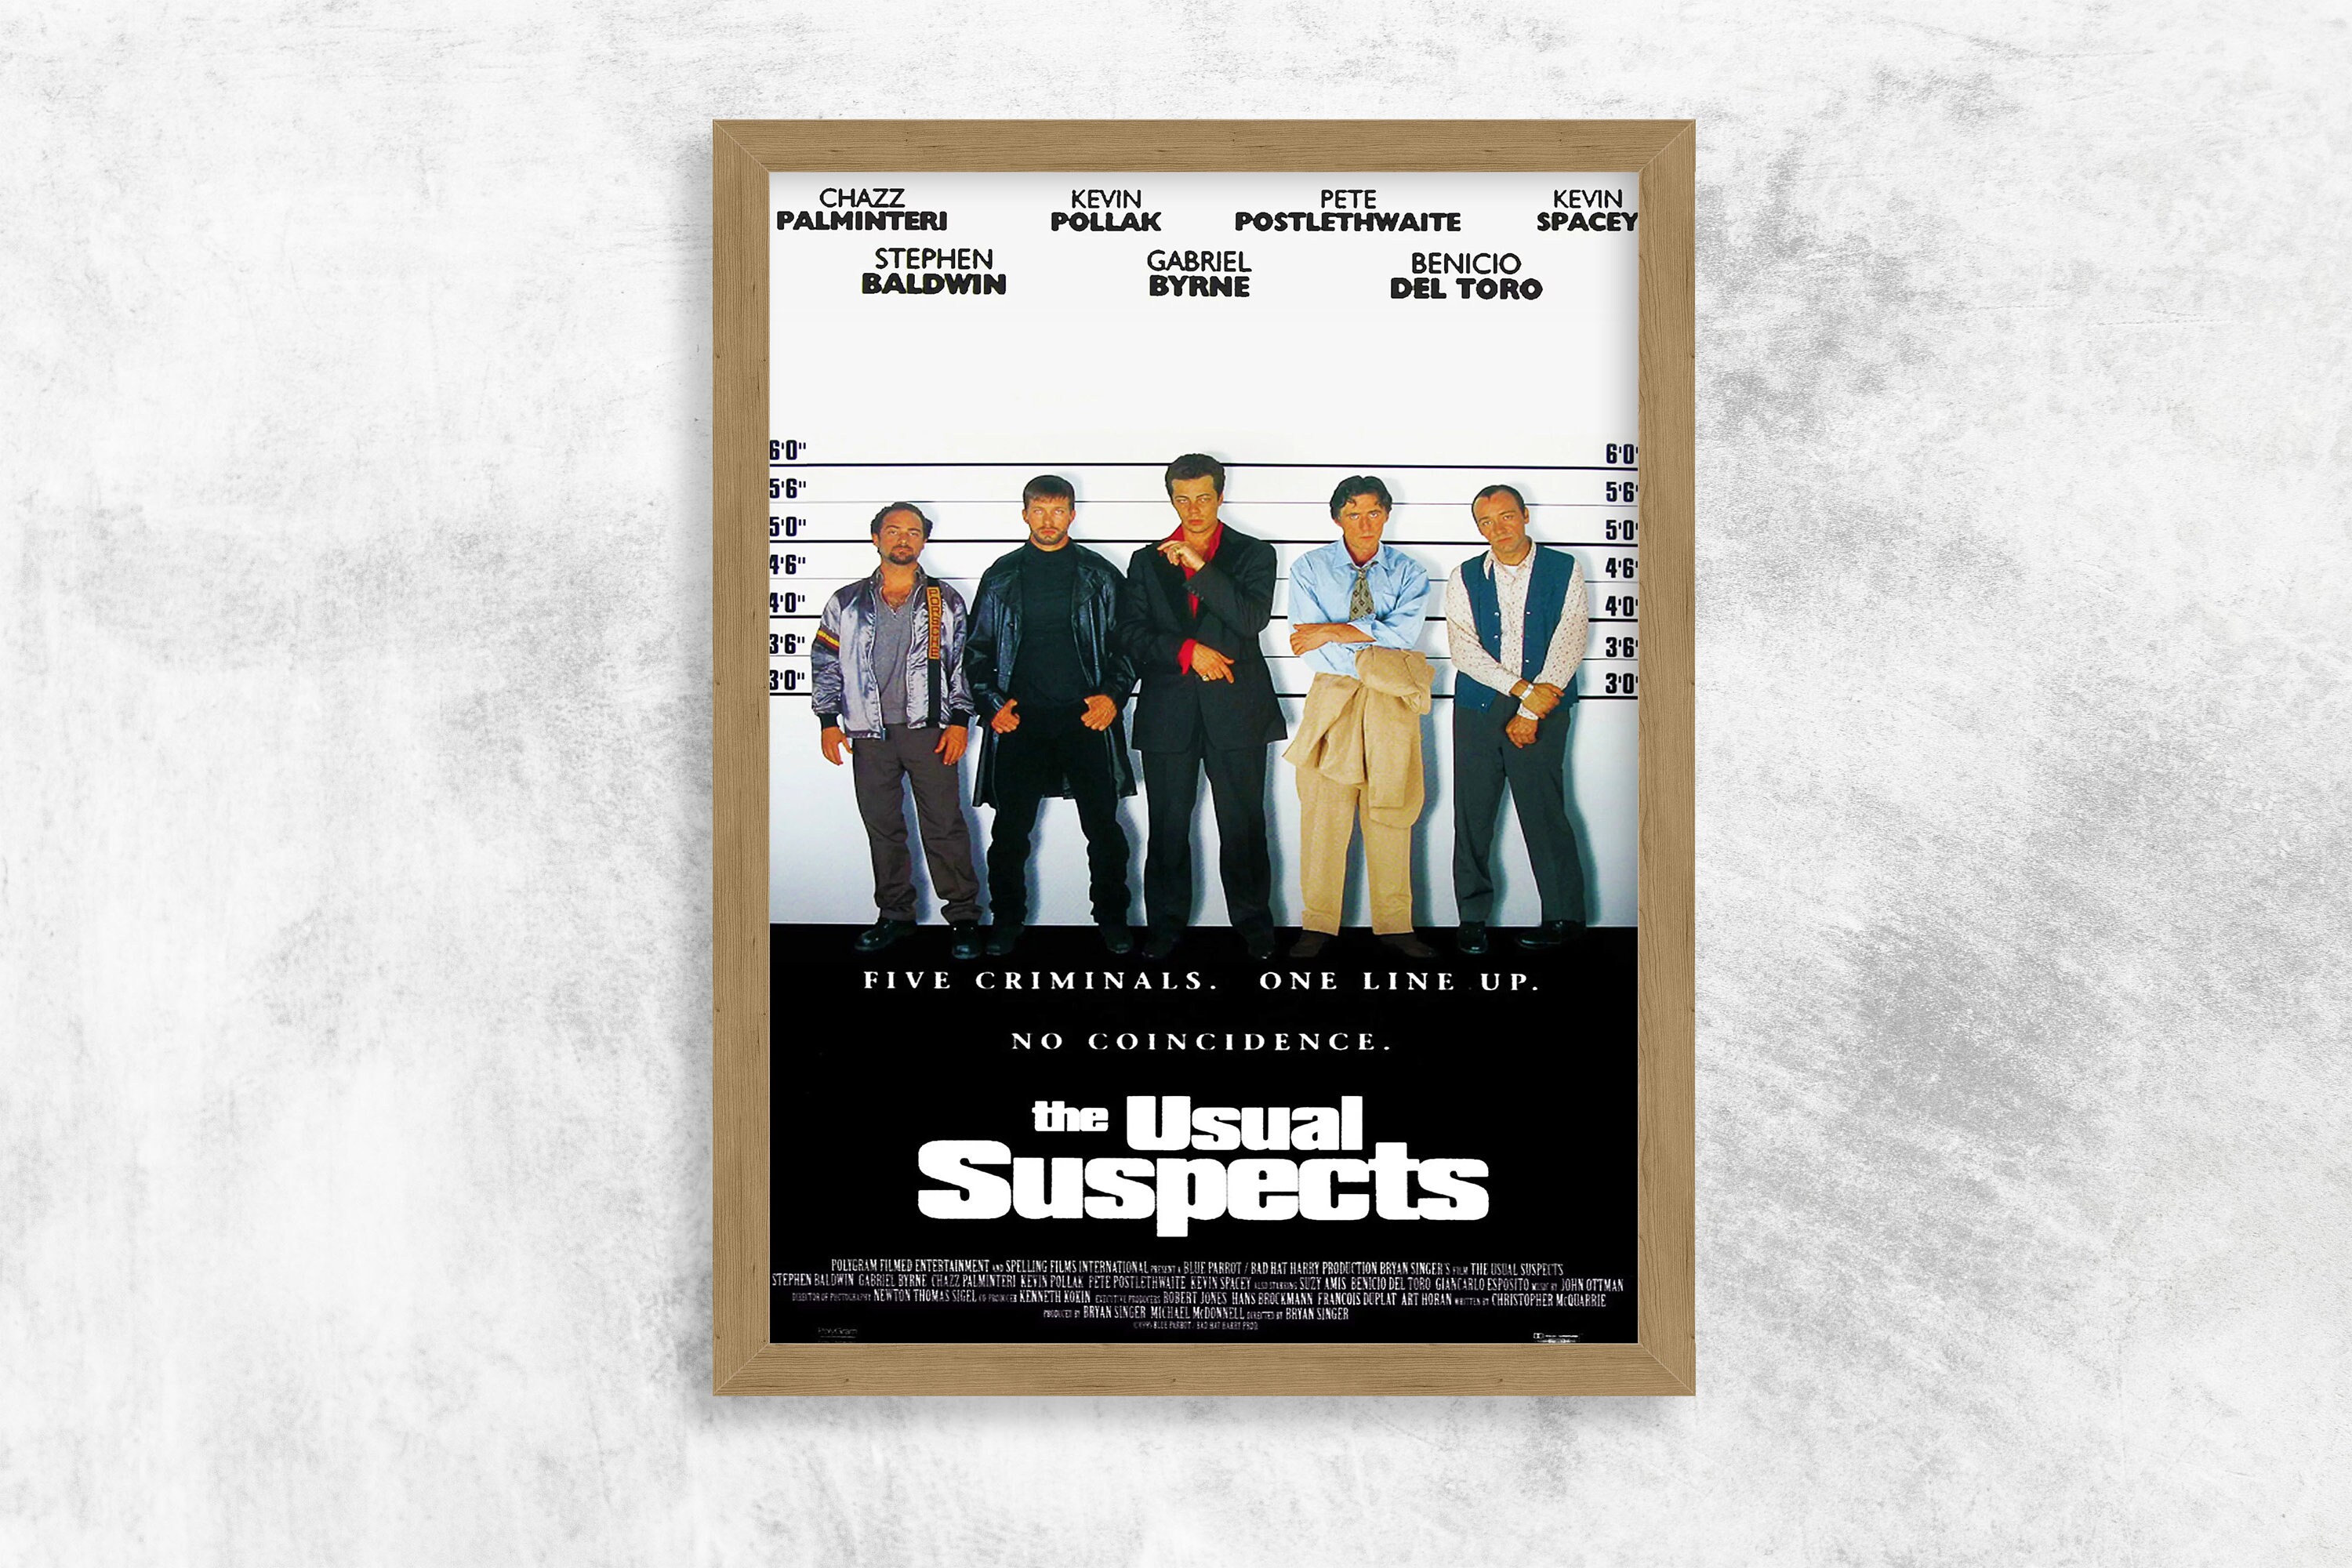 The Usual Suspects blockbuster movie backer Poster 8 X 5.5 Keyser